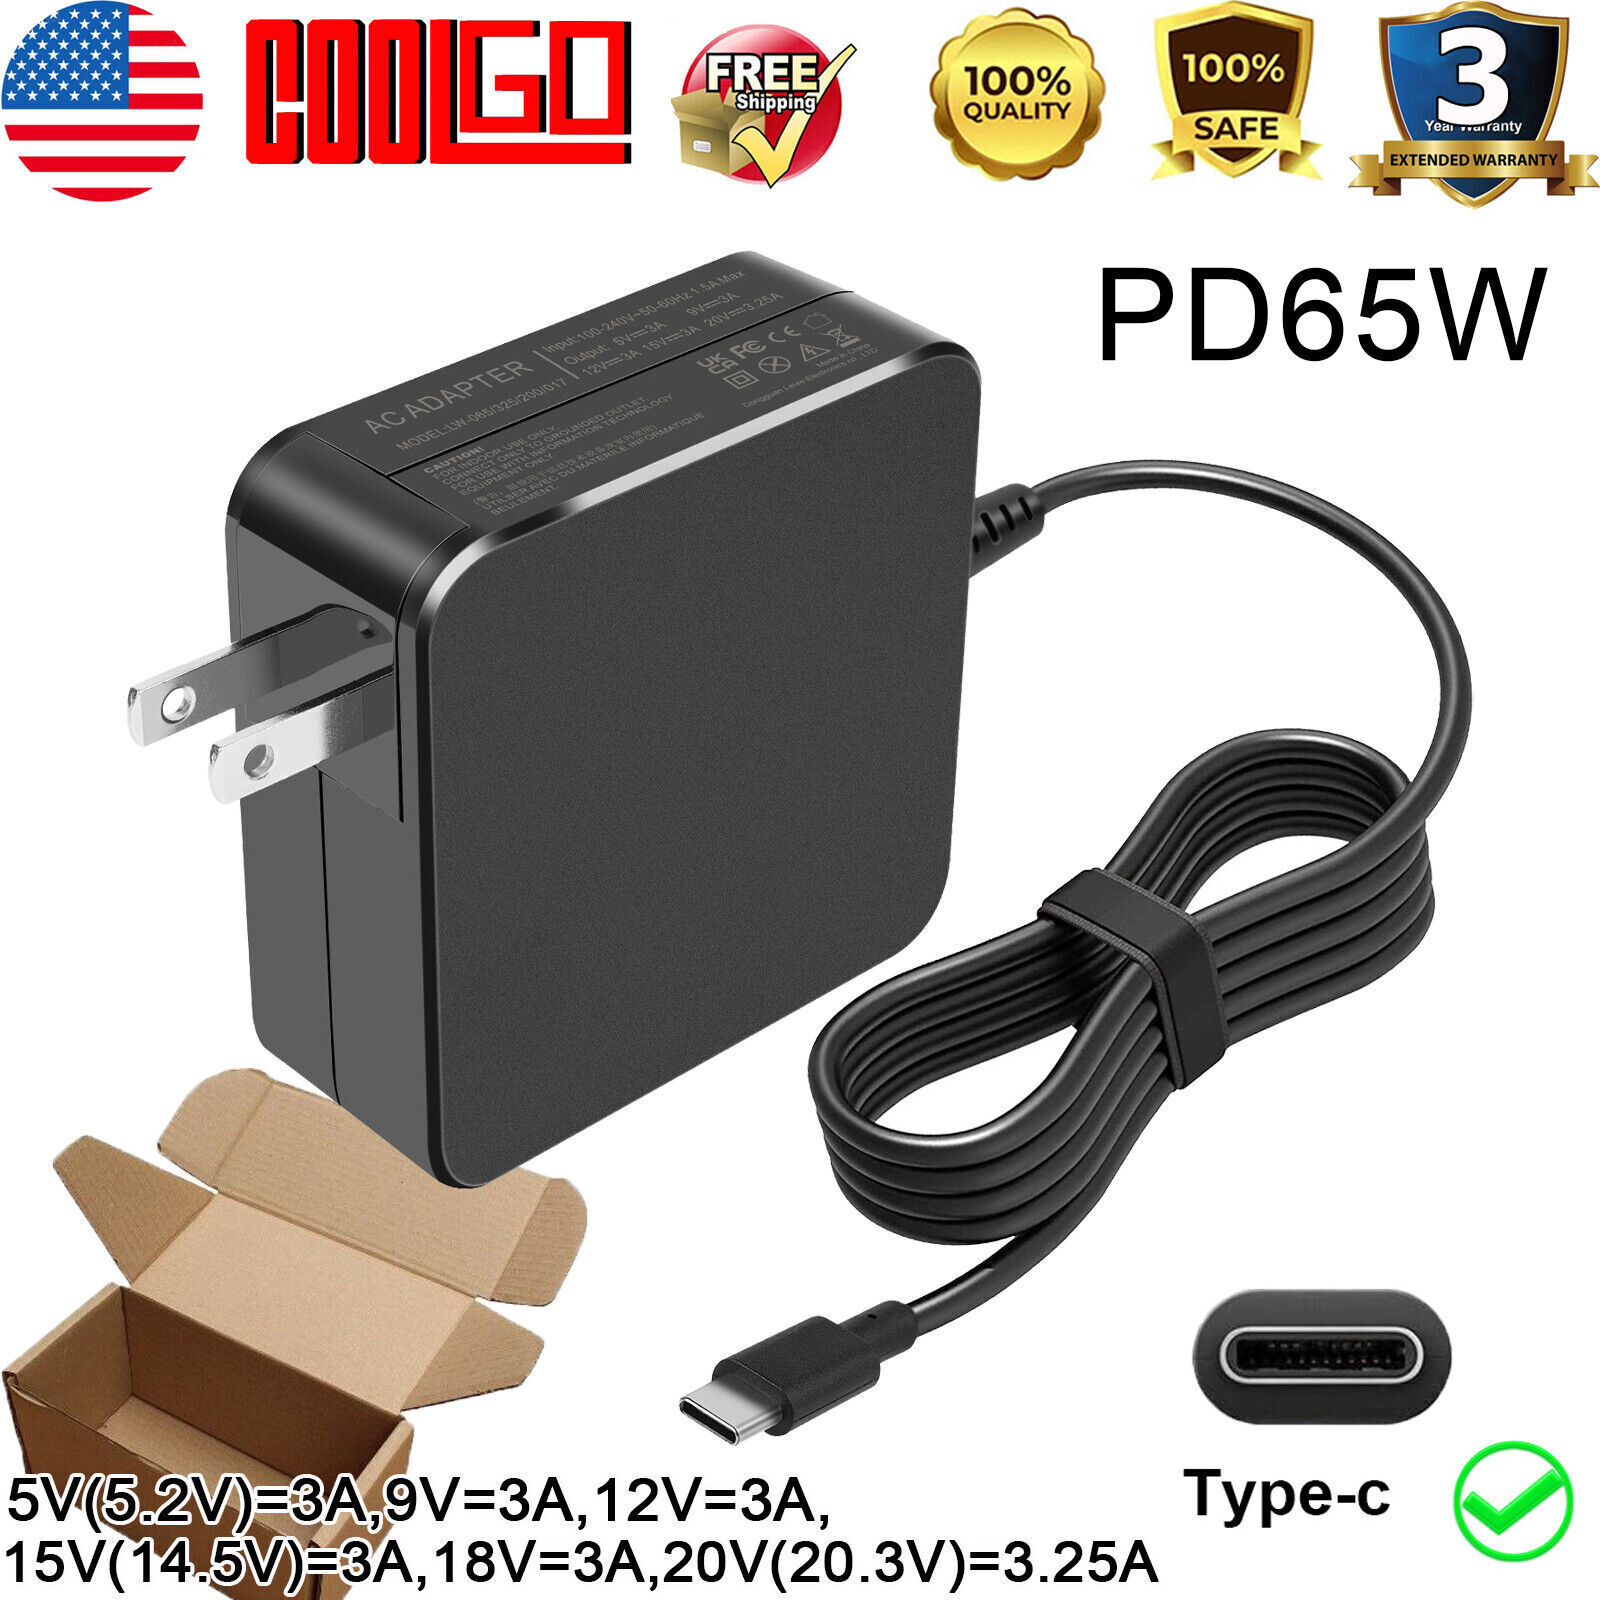 65W Type-C USB-C Laptop Adapter Charger for Dell HP Lenovo ASUS Acer Smart Phone